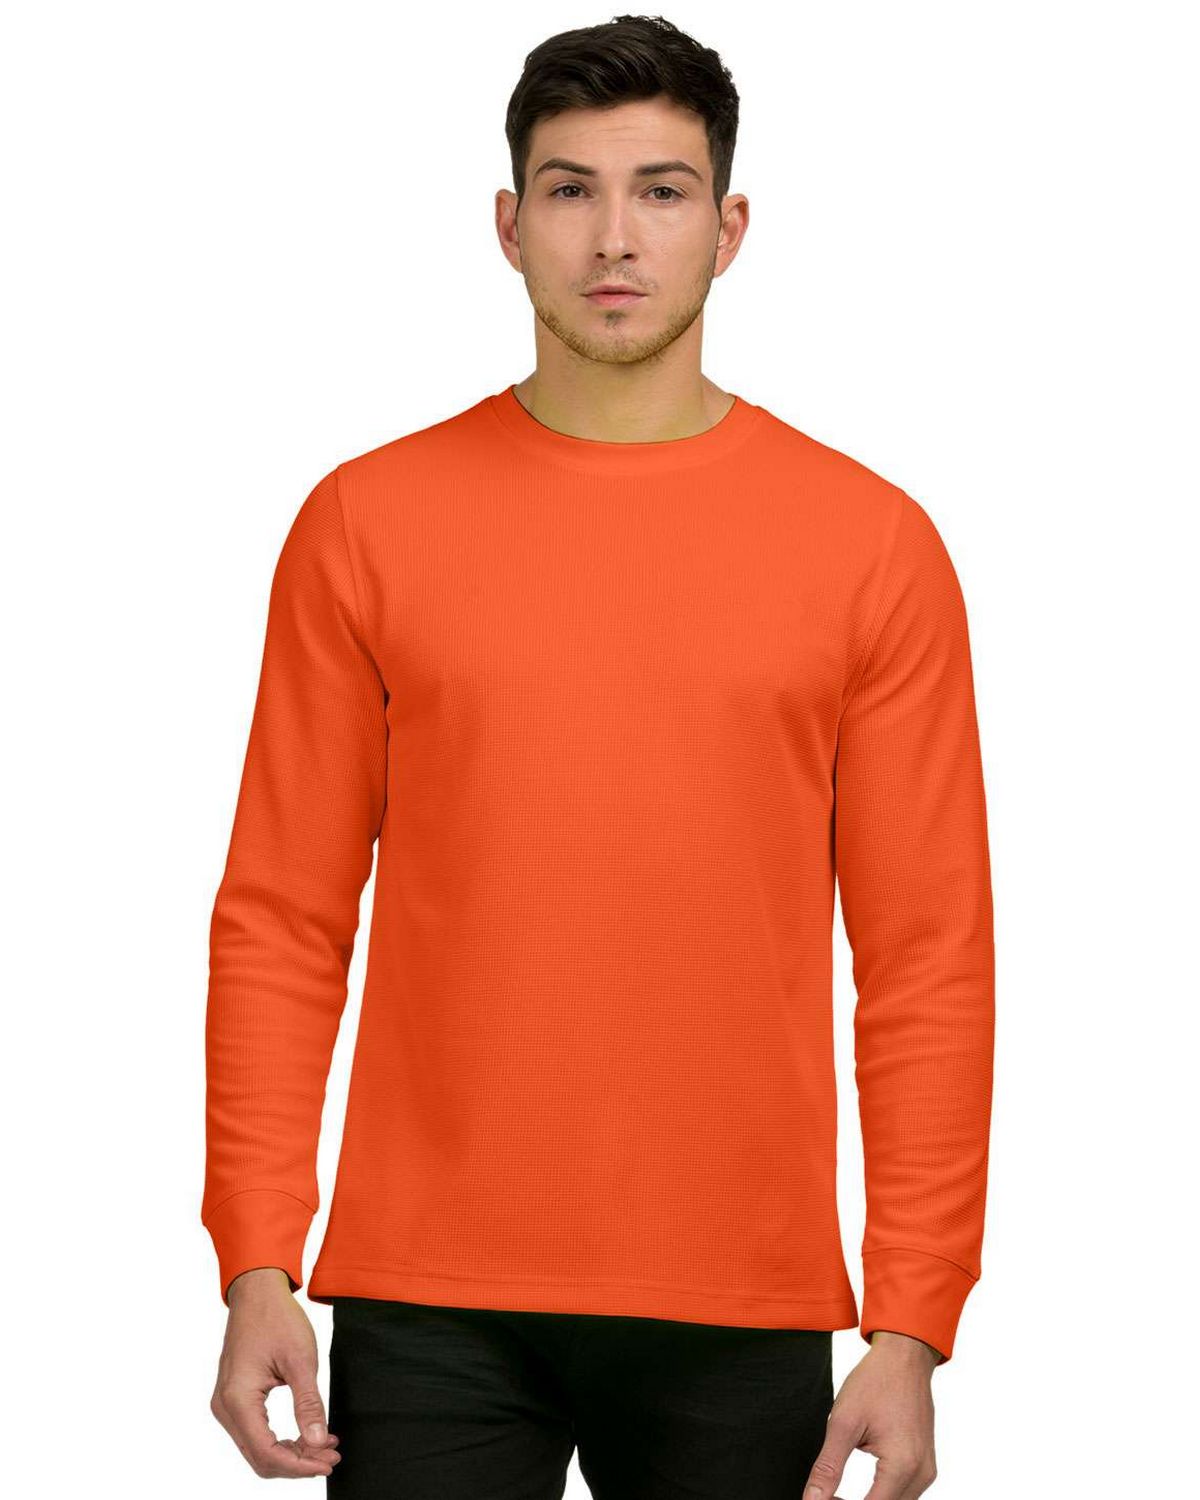 Tri-Mountain K500 Mens Long Sleeve Safety Thermal T-Shirt